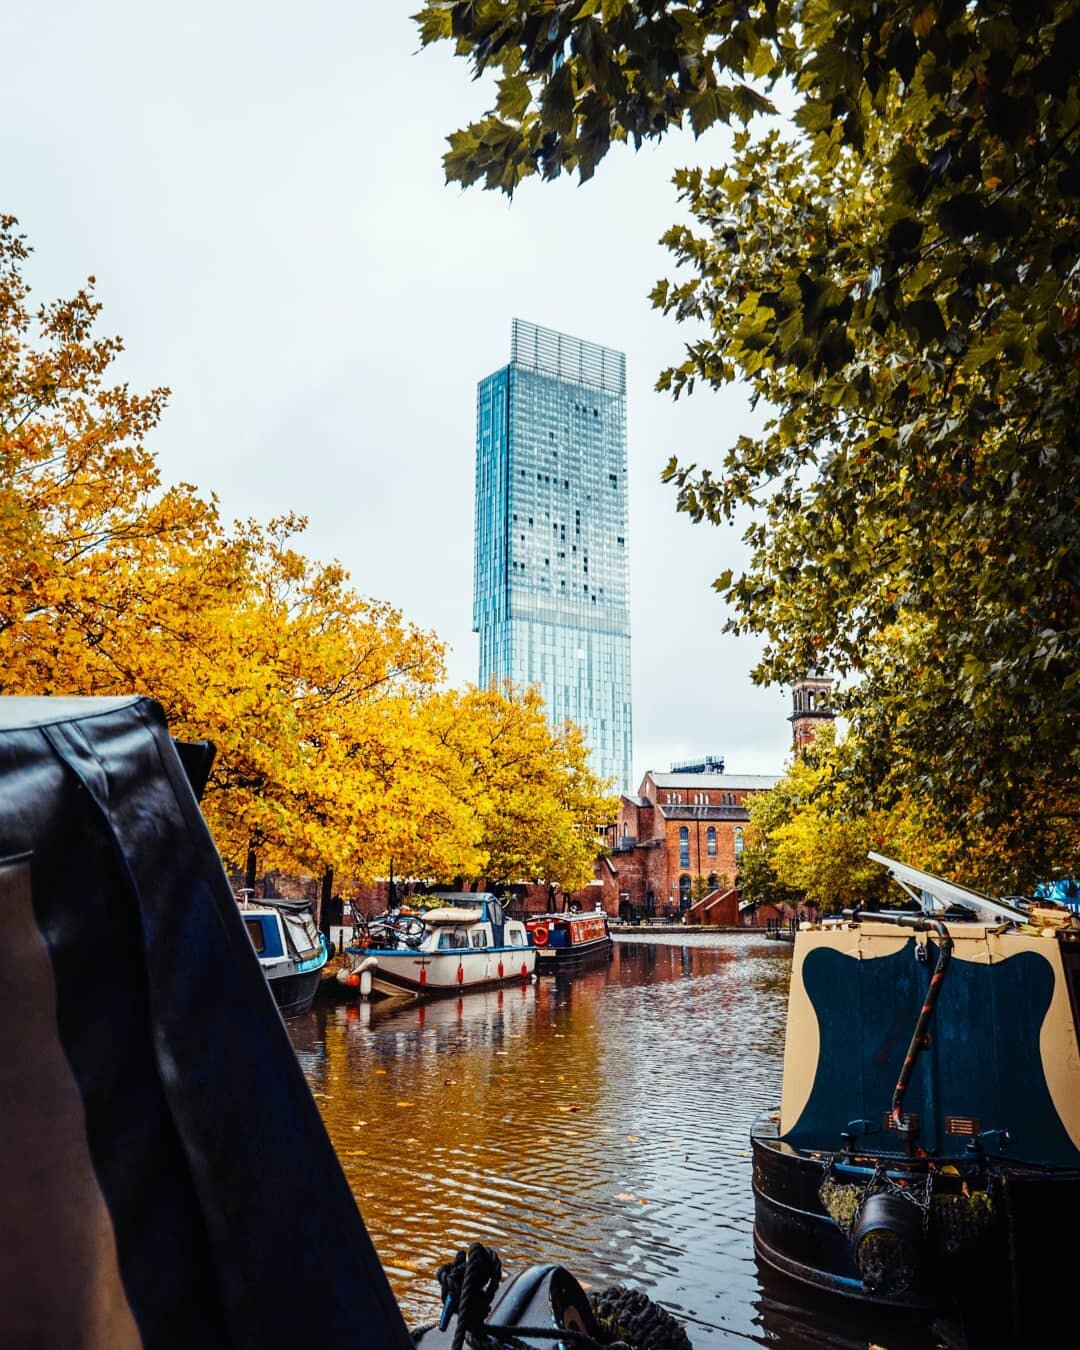 Taking any opportunity to get outside at the moment. Captured this last week while walking around Castlefield with @fionawhtlw 🍁
⠀
⠀
📸 Panasonic GH5 📸
Lens - 12-60/F2.8
Exposure Time - 1/640
Focal Length - 12mm
ISO Speed - 200
F-Number - 2.8
⠀
⠀
⠀